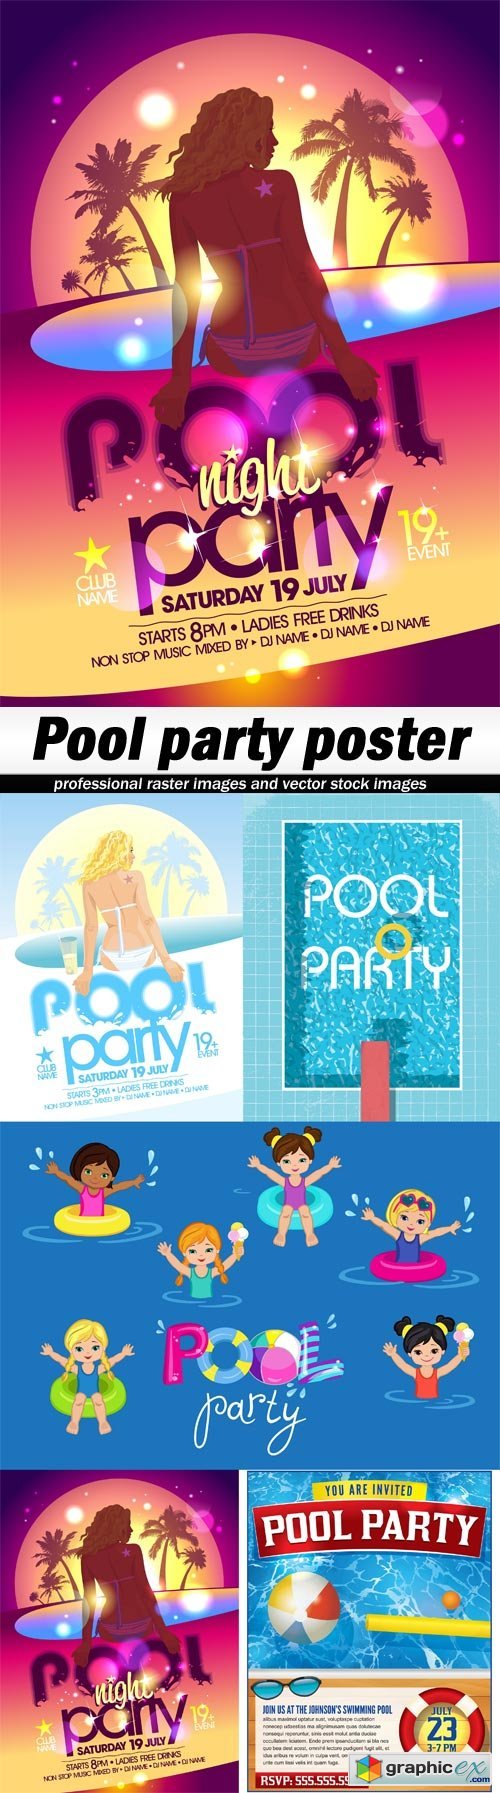 Pool party poster - 5 EPS